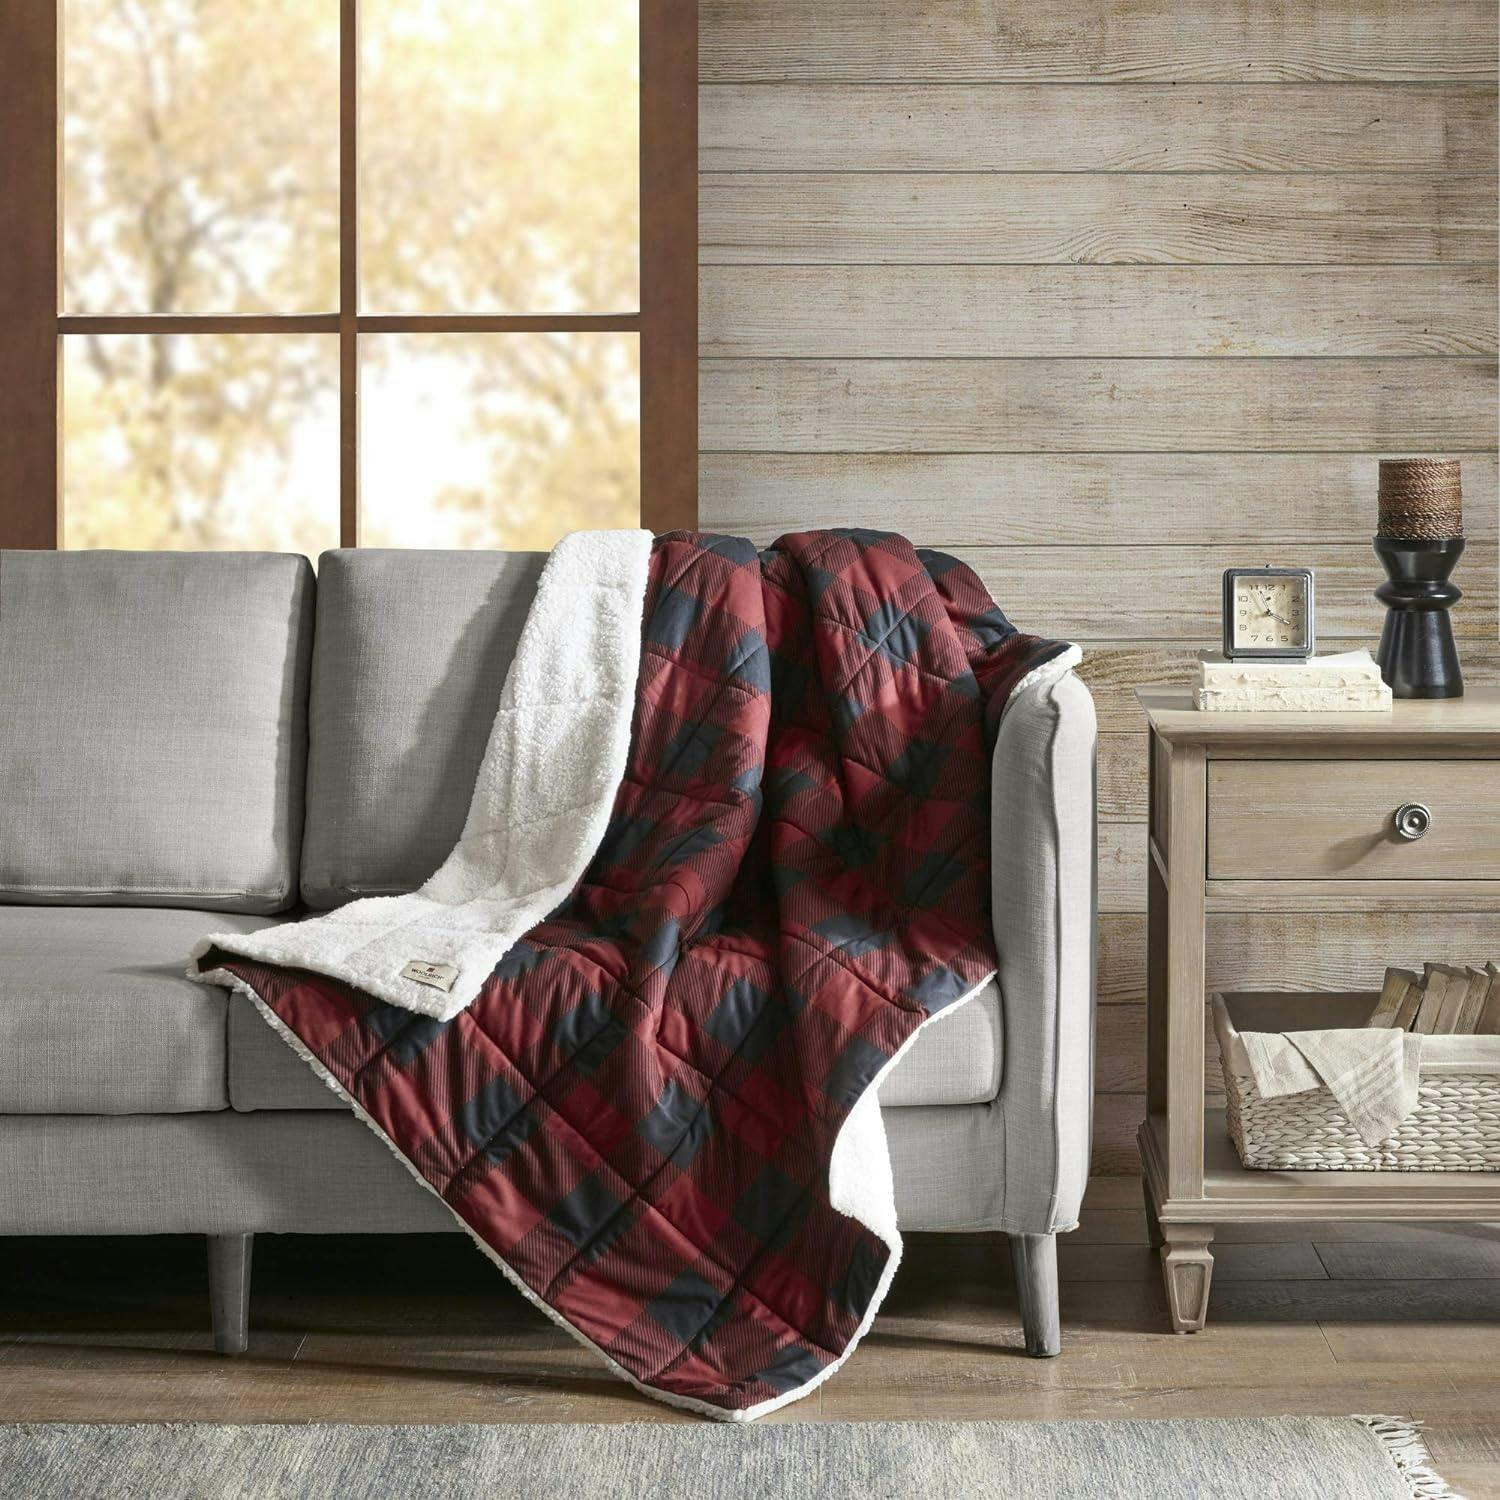 Cozy Cabin Oversized Sherpa Reversible Throw Blanket 50x70 in Red Plaid